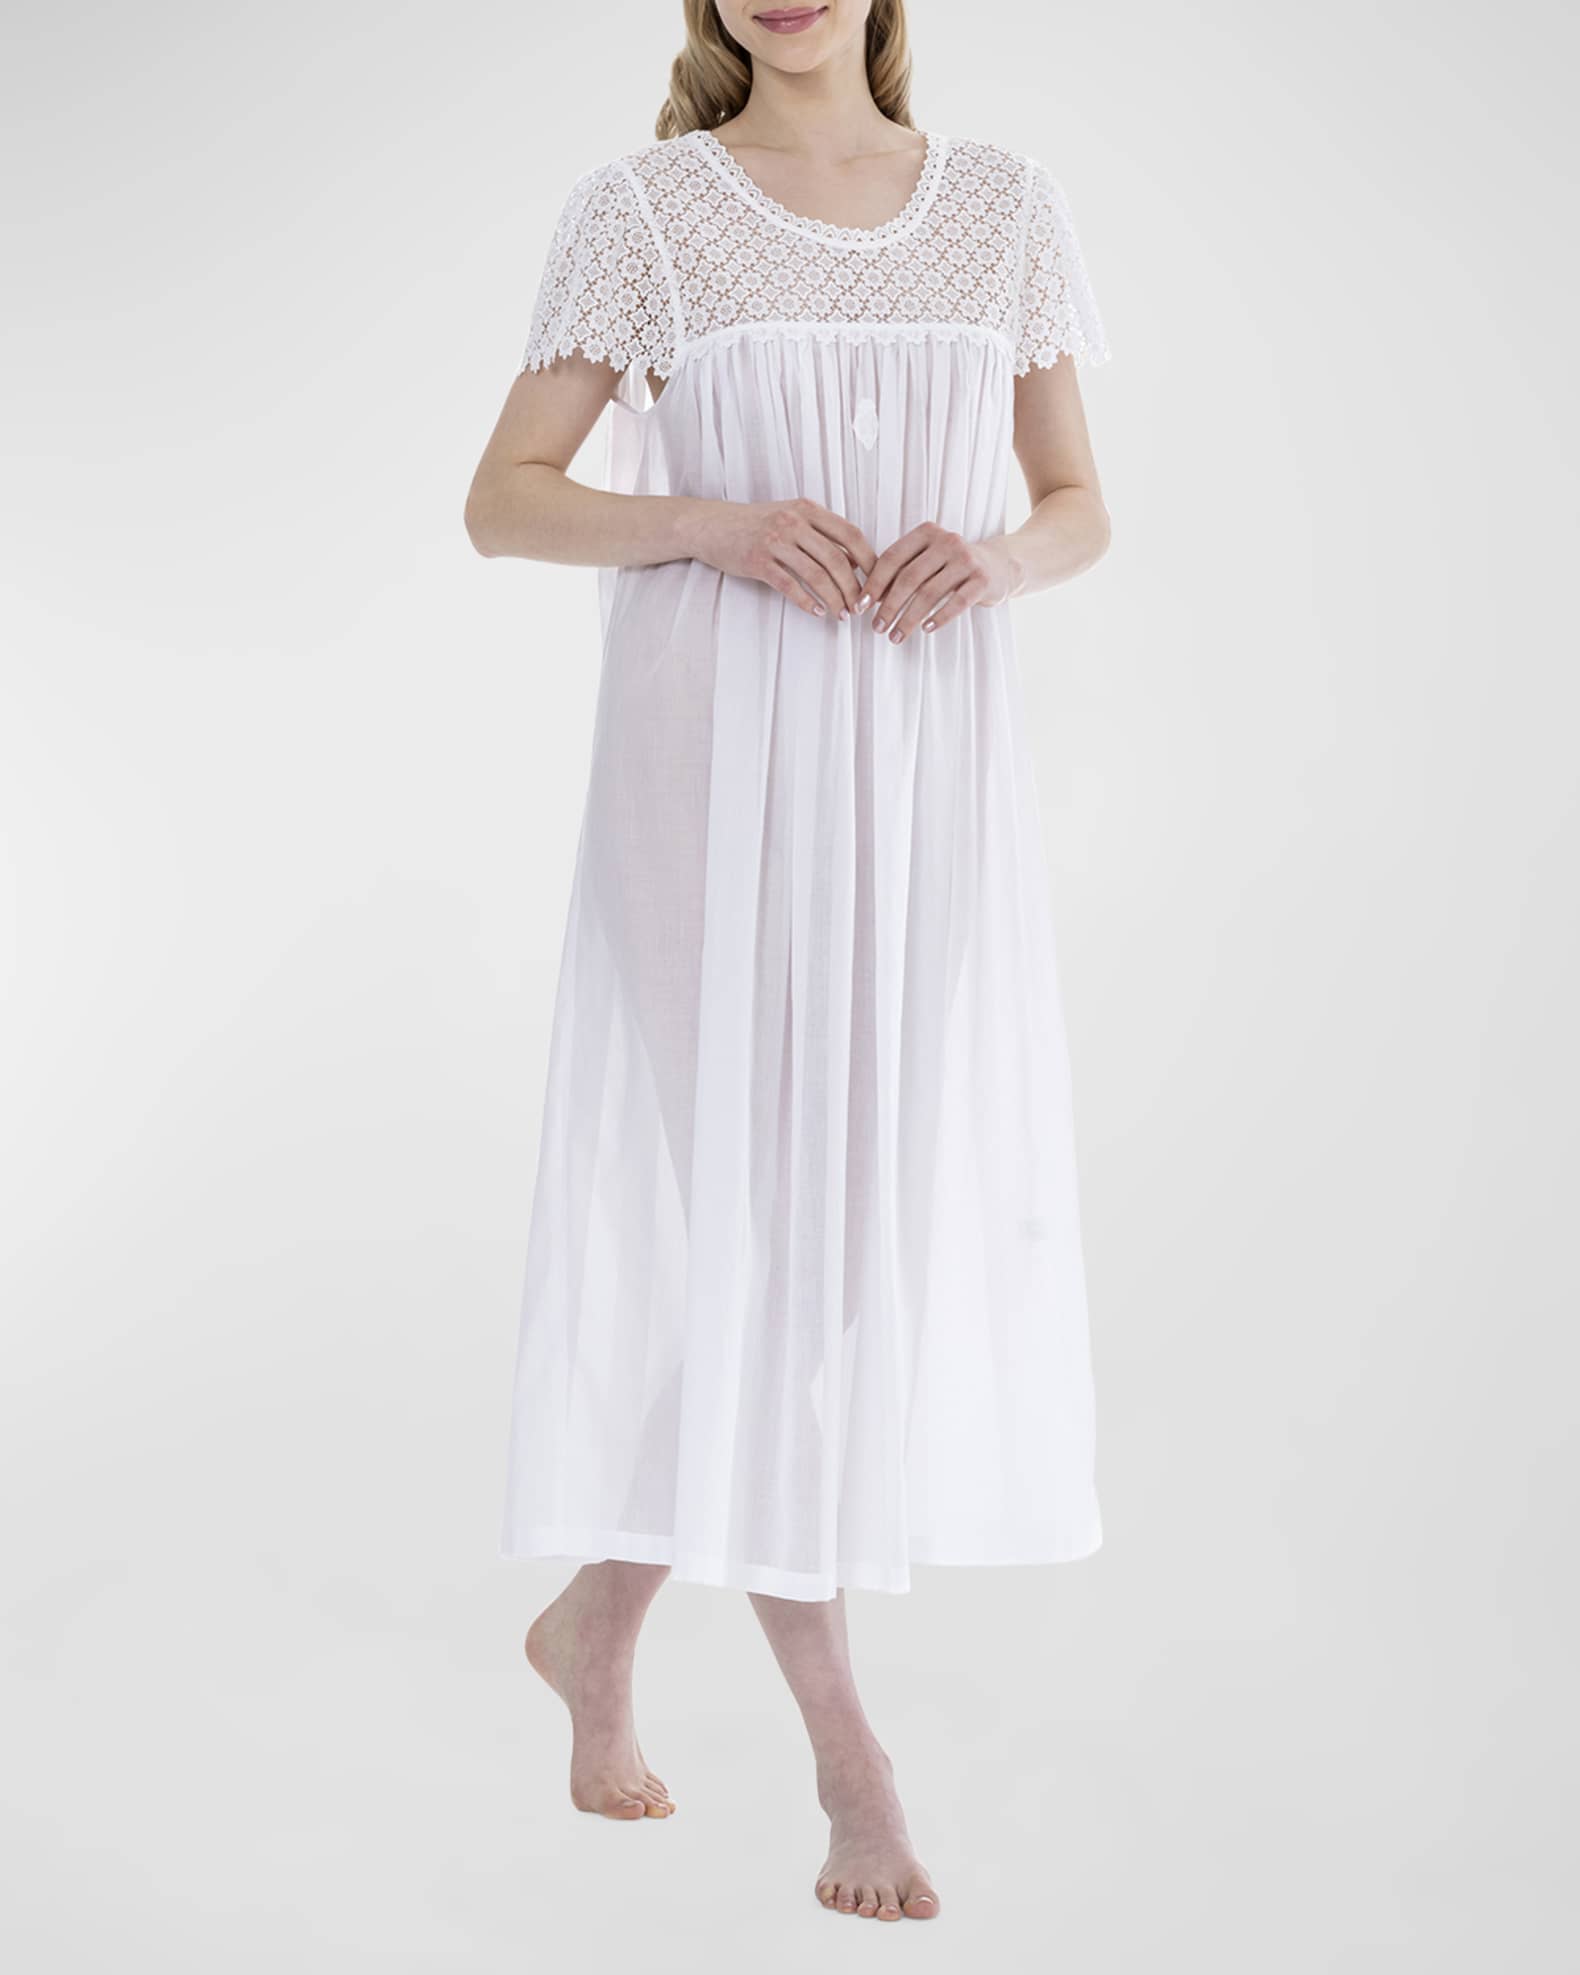 Women's Celestine Cap Sleeve Long Nightgown with White Lace